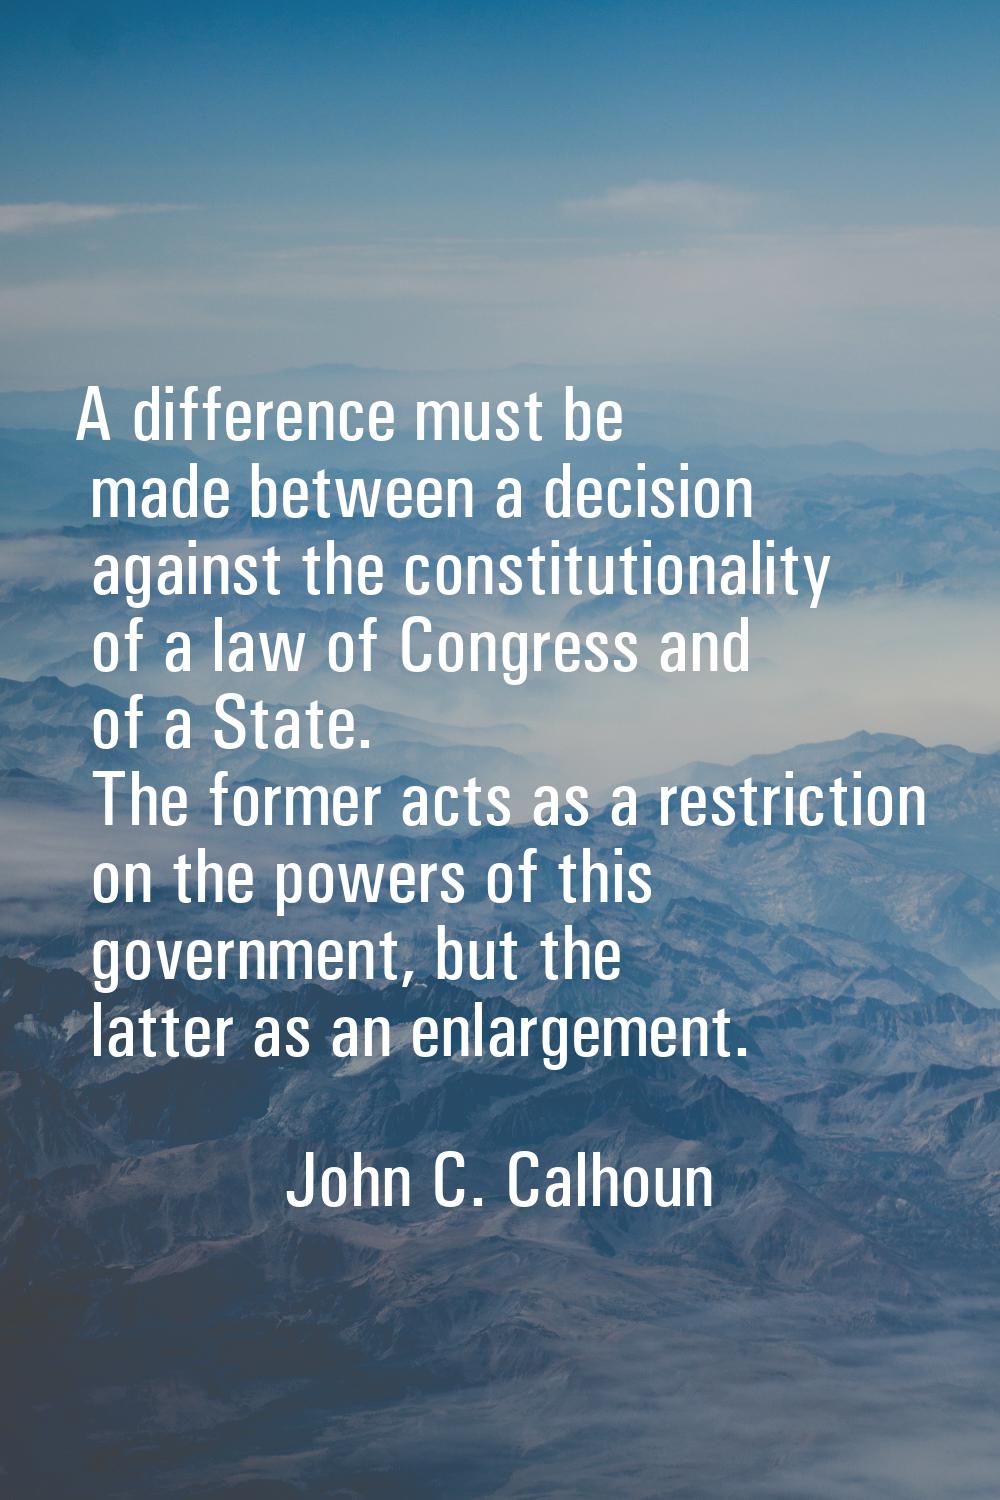 A difference must be made between a decision against the constitutionality of a law of Congress and